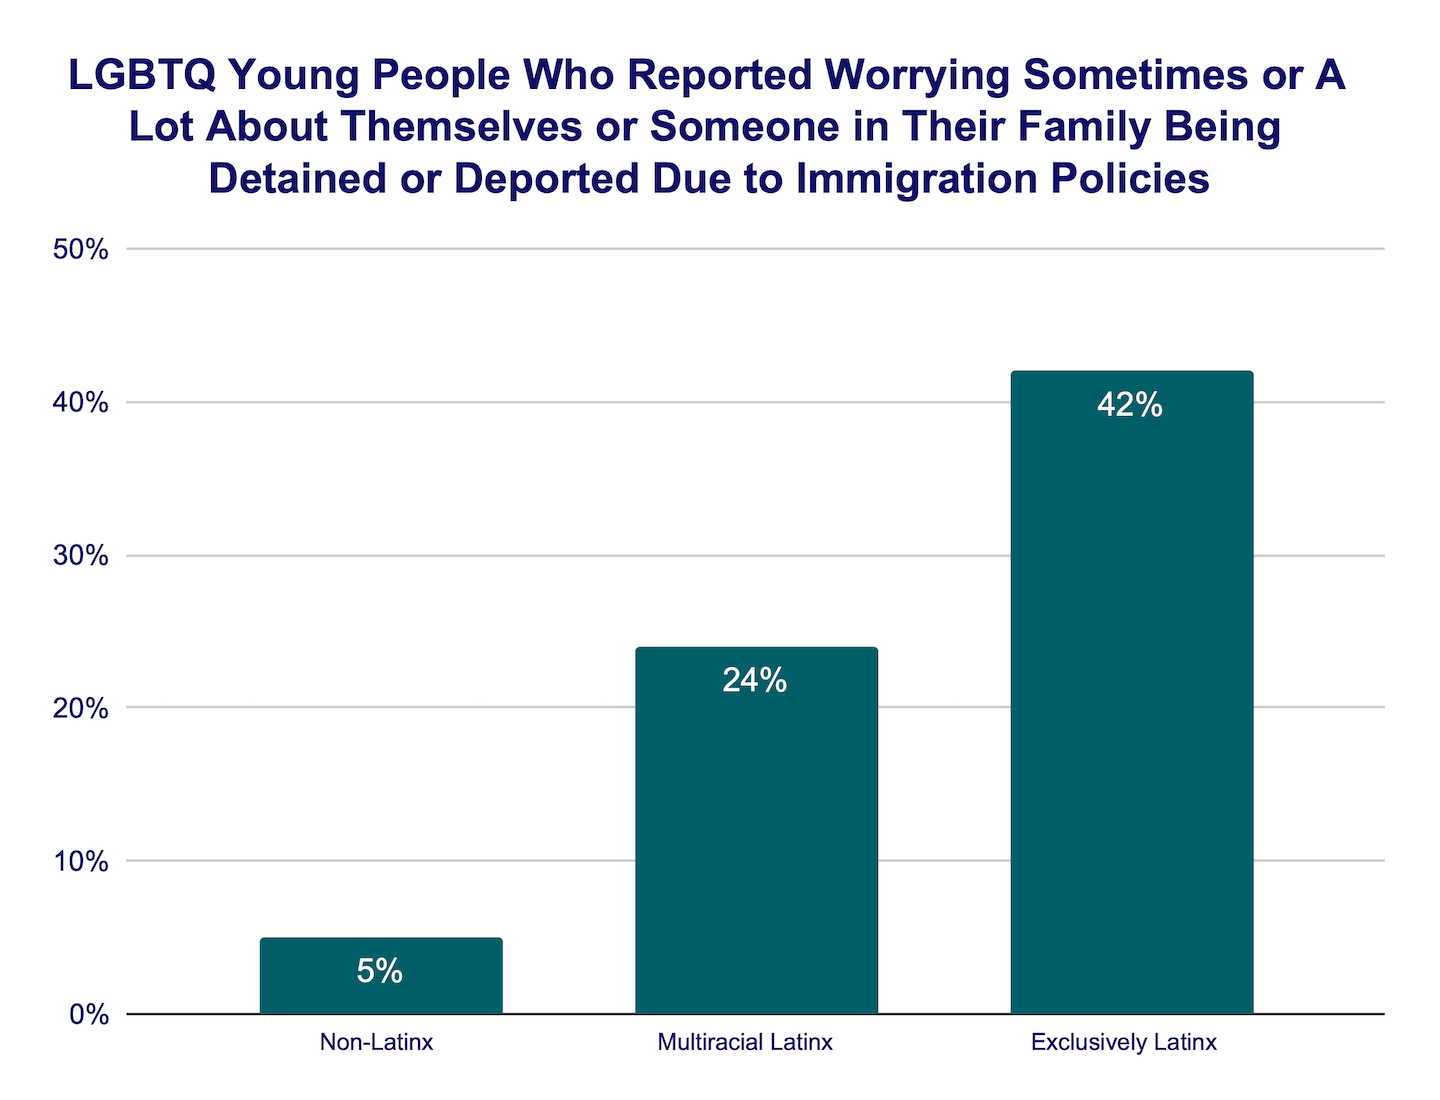 LGBTQ young people who reported worrying sometimes or a lot about themselves or someone in their family being detained or deported due to immigration policies bar graph